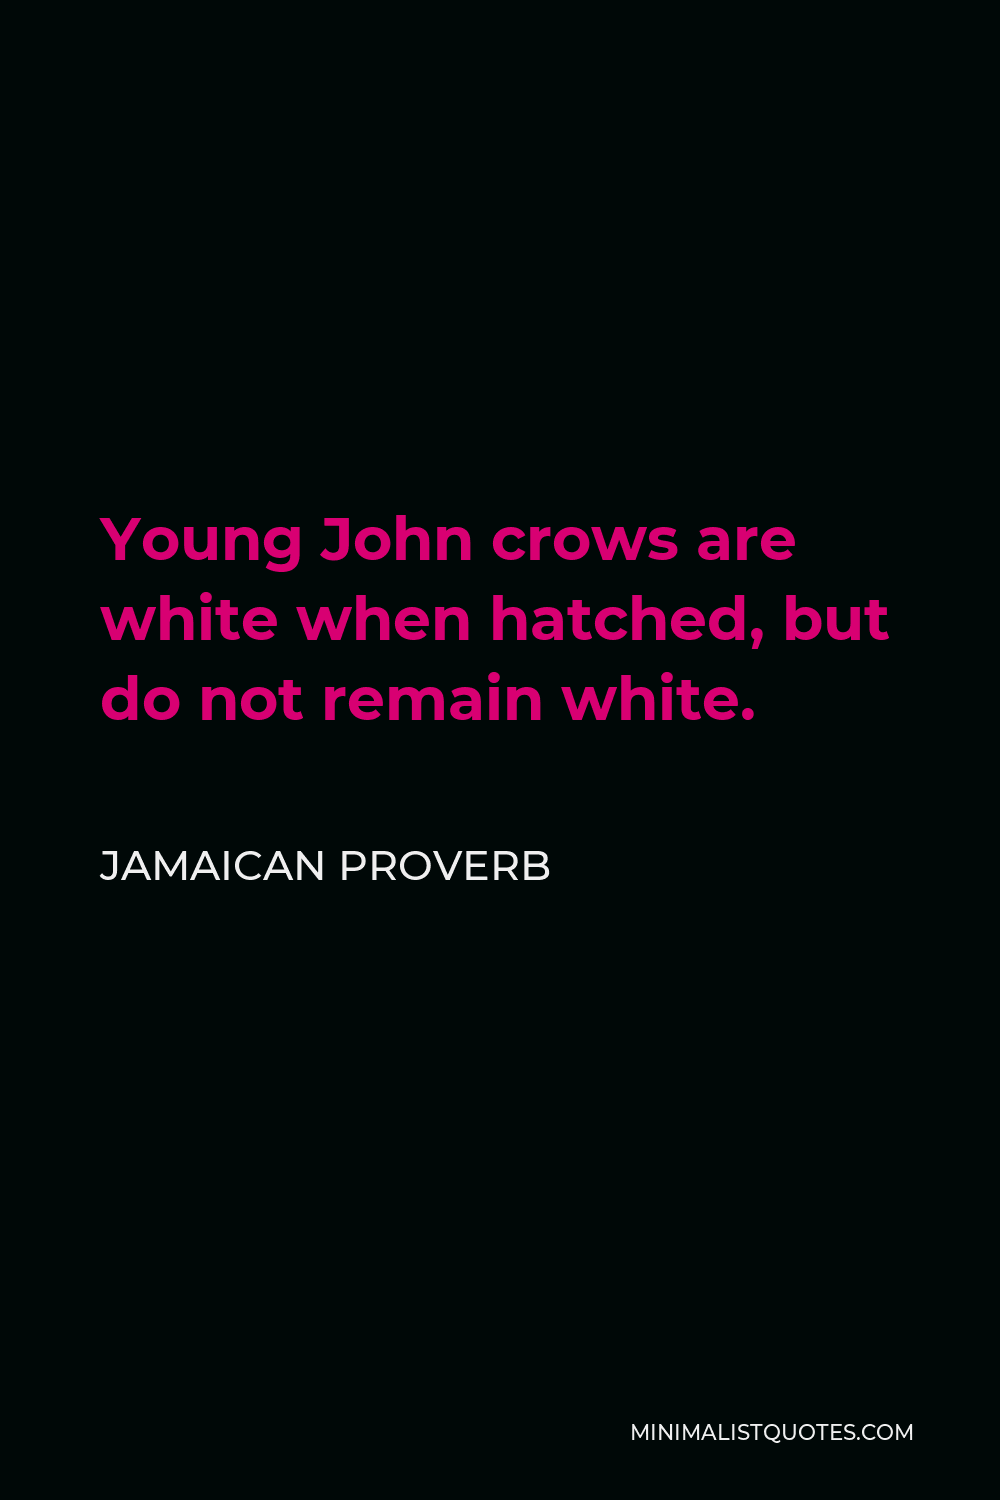 Jamaican Proverb Quote - Young John crows are white when hatched, but do not remain white.